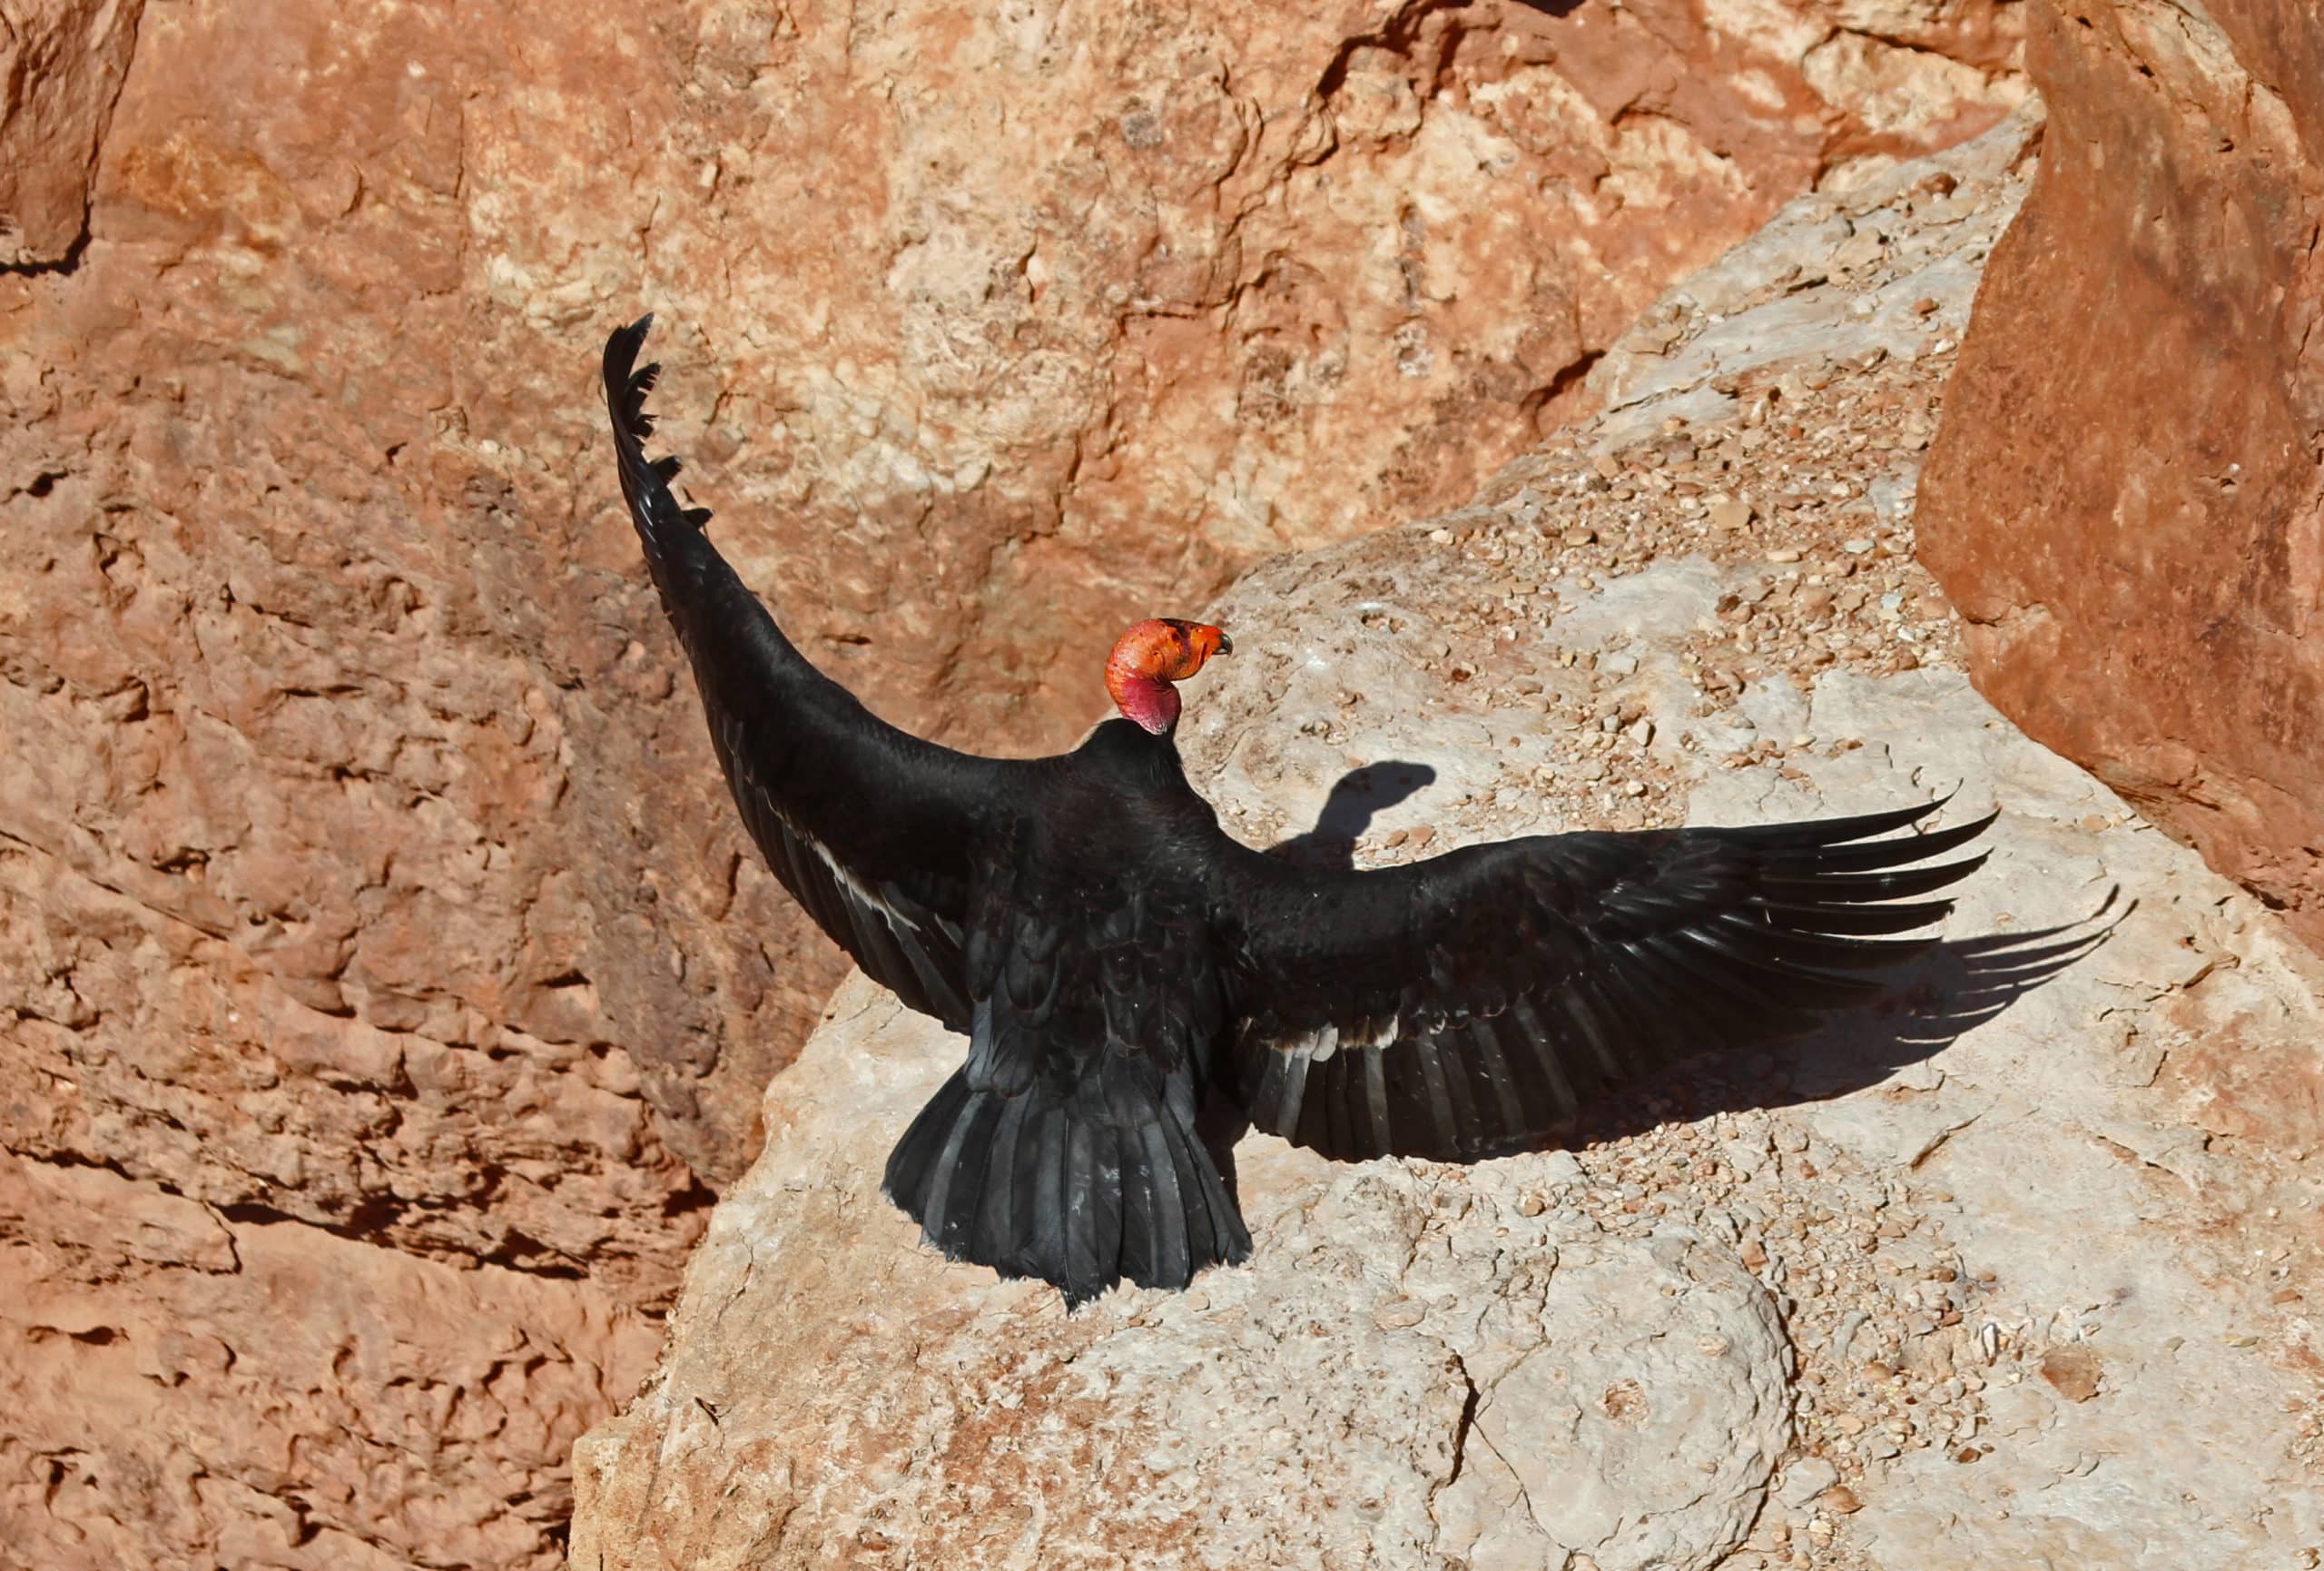 The California Condor is one of the species that was tested with the new metrics.